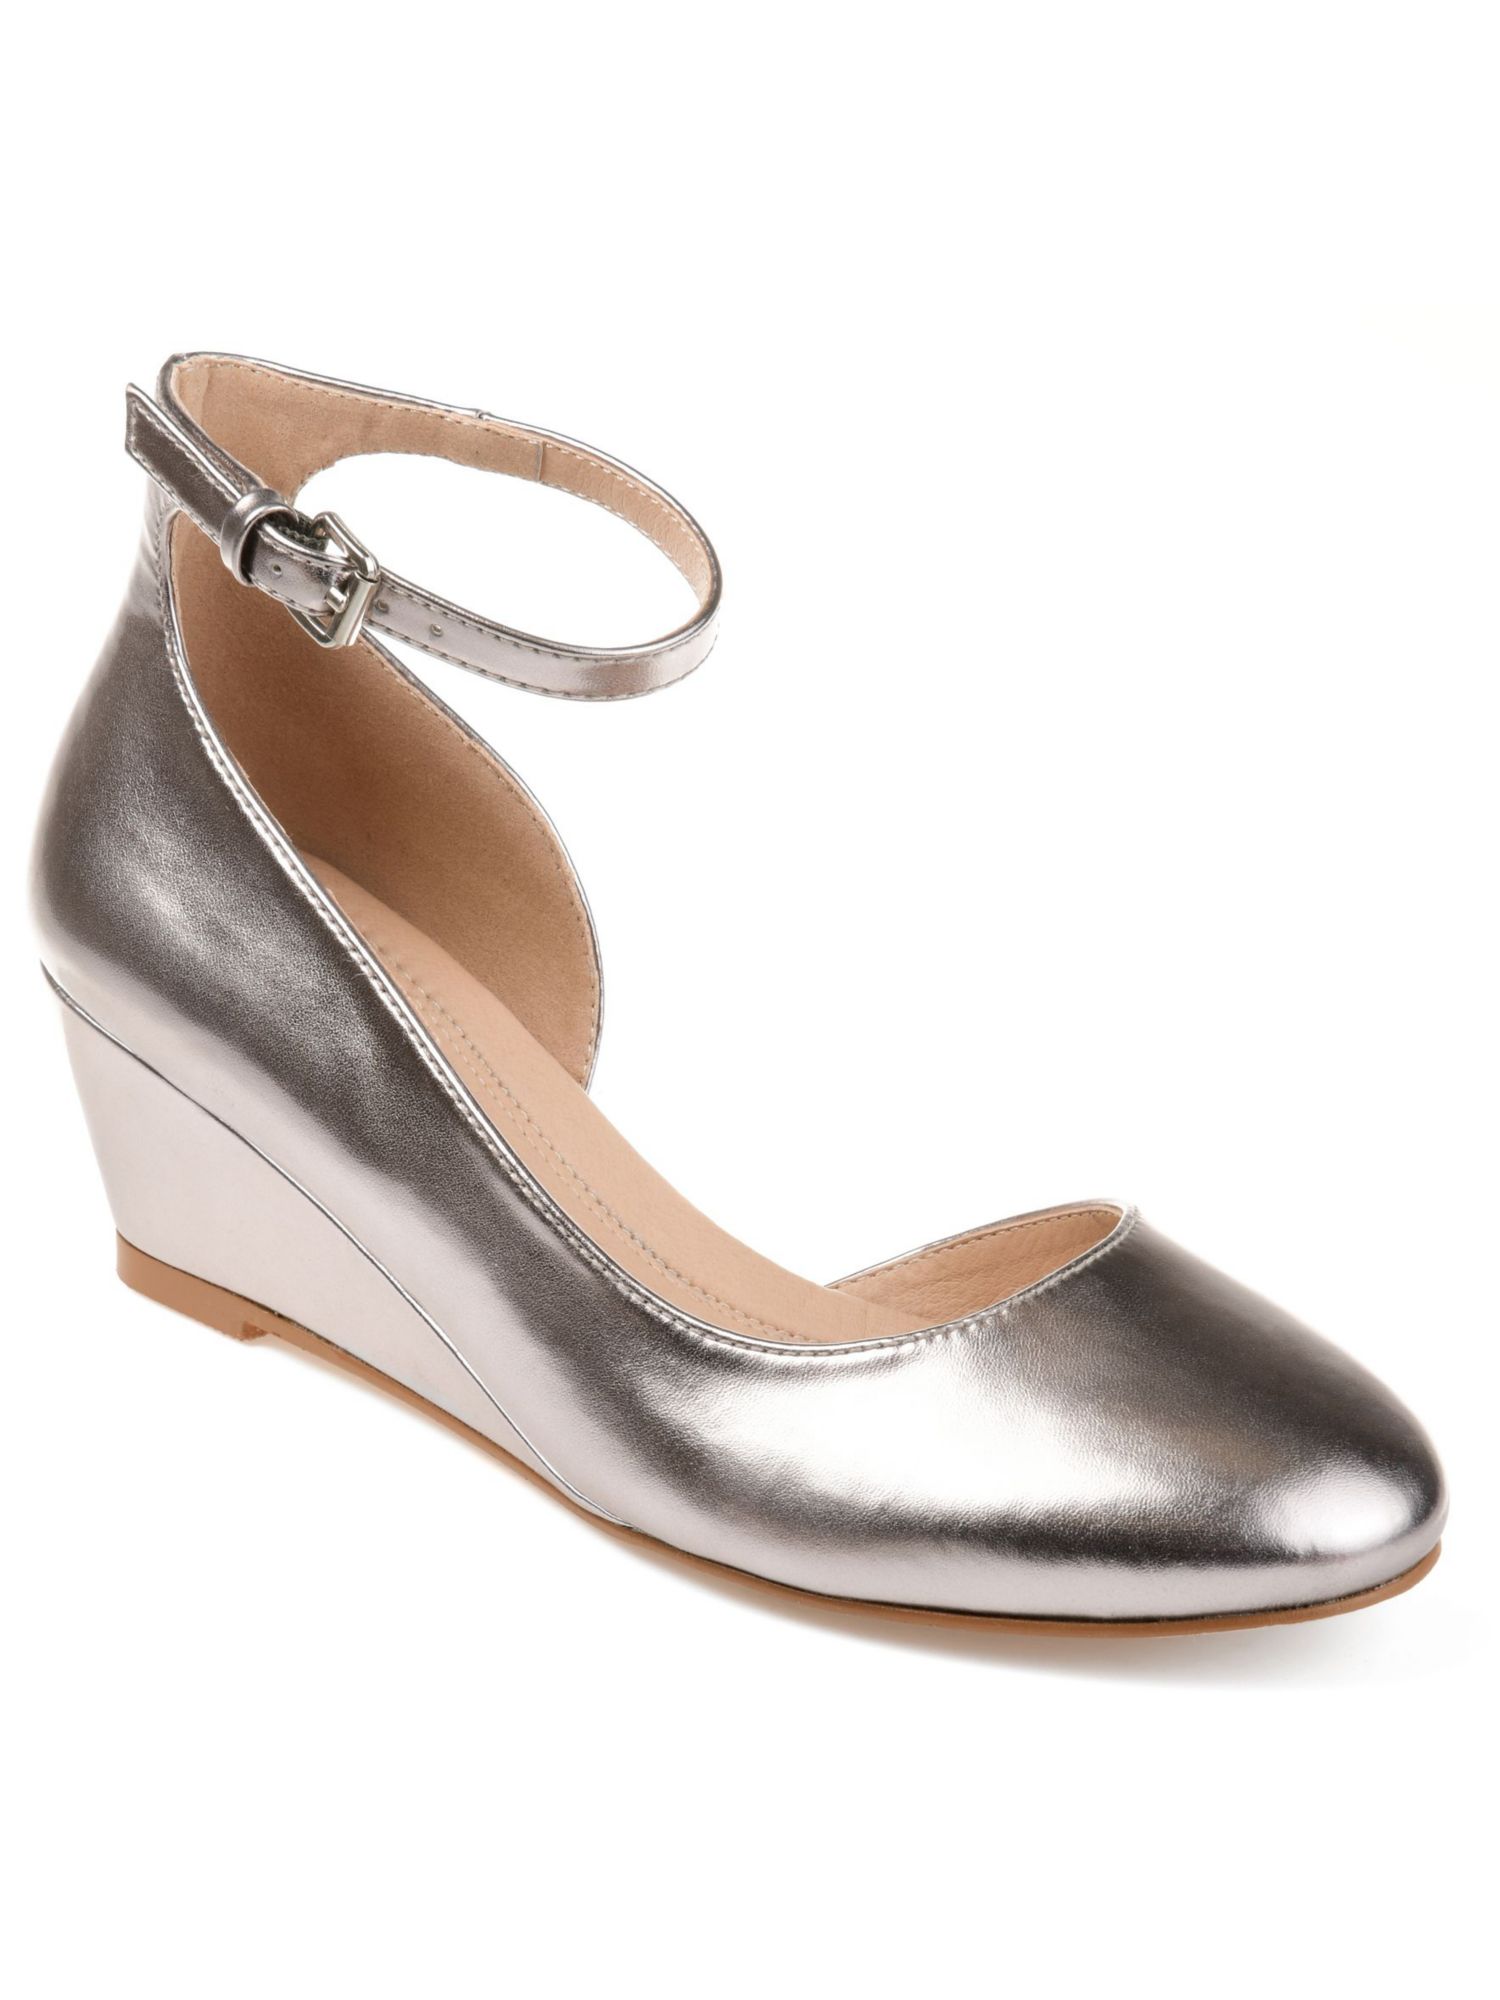 JOURNEE COLLECTION Womens Silver D Orsay Metallic Ankle Strap Seely Round Toe Wedge Buckle Heels 7 M